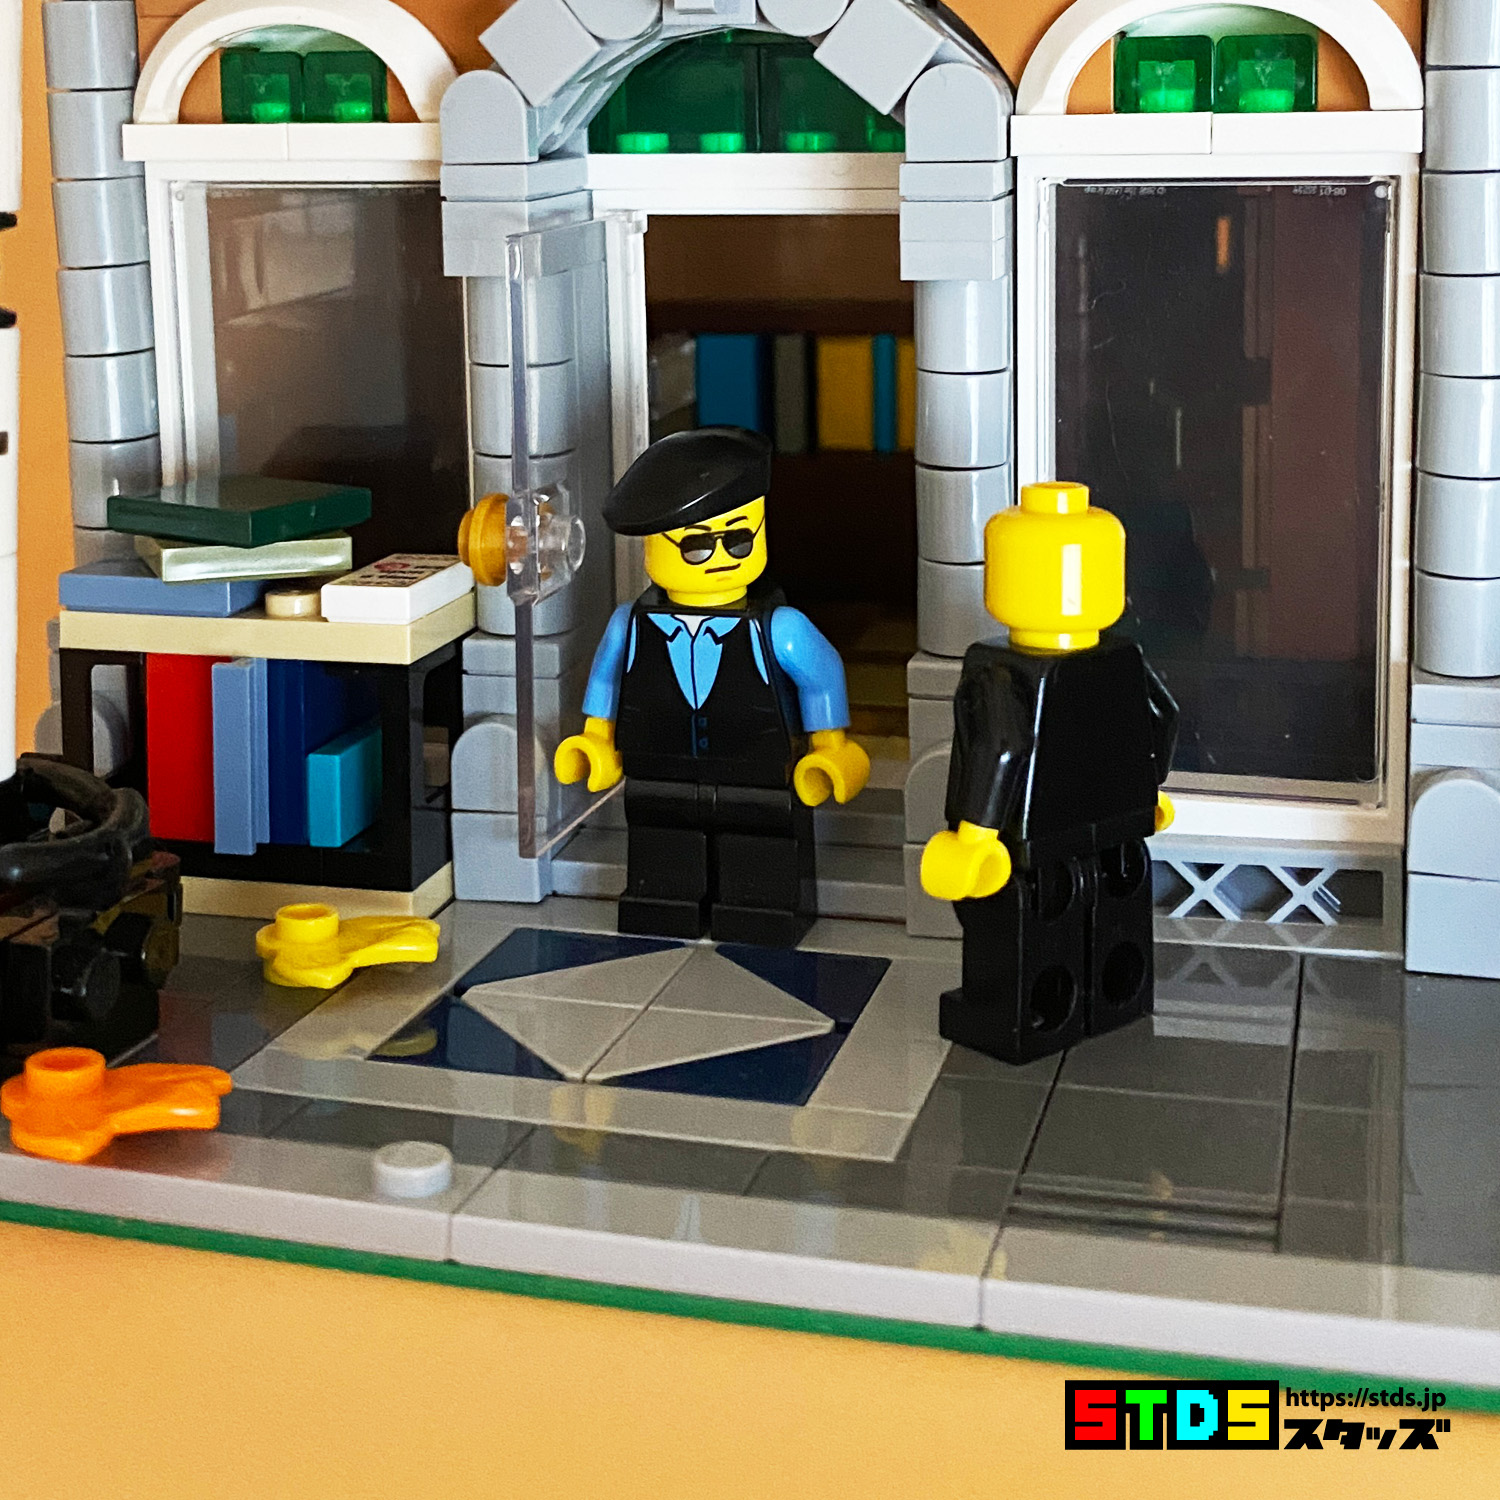 LEGO 10270 Bookshop Review : Watch Statham and Stallone's Breathtaking Action